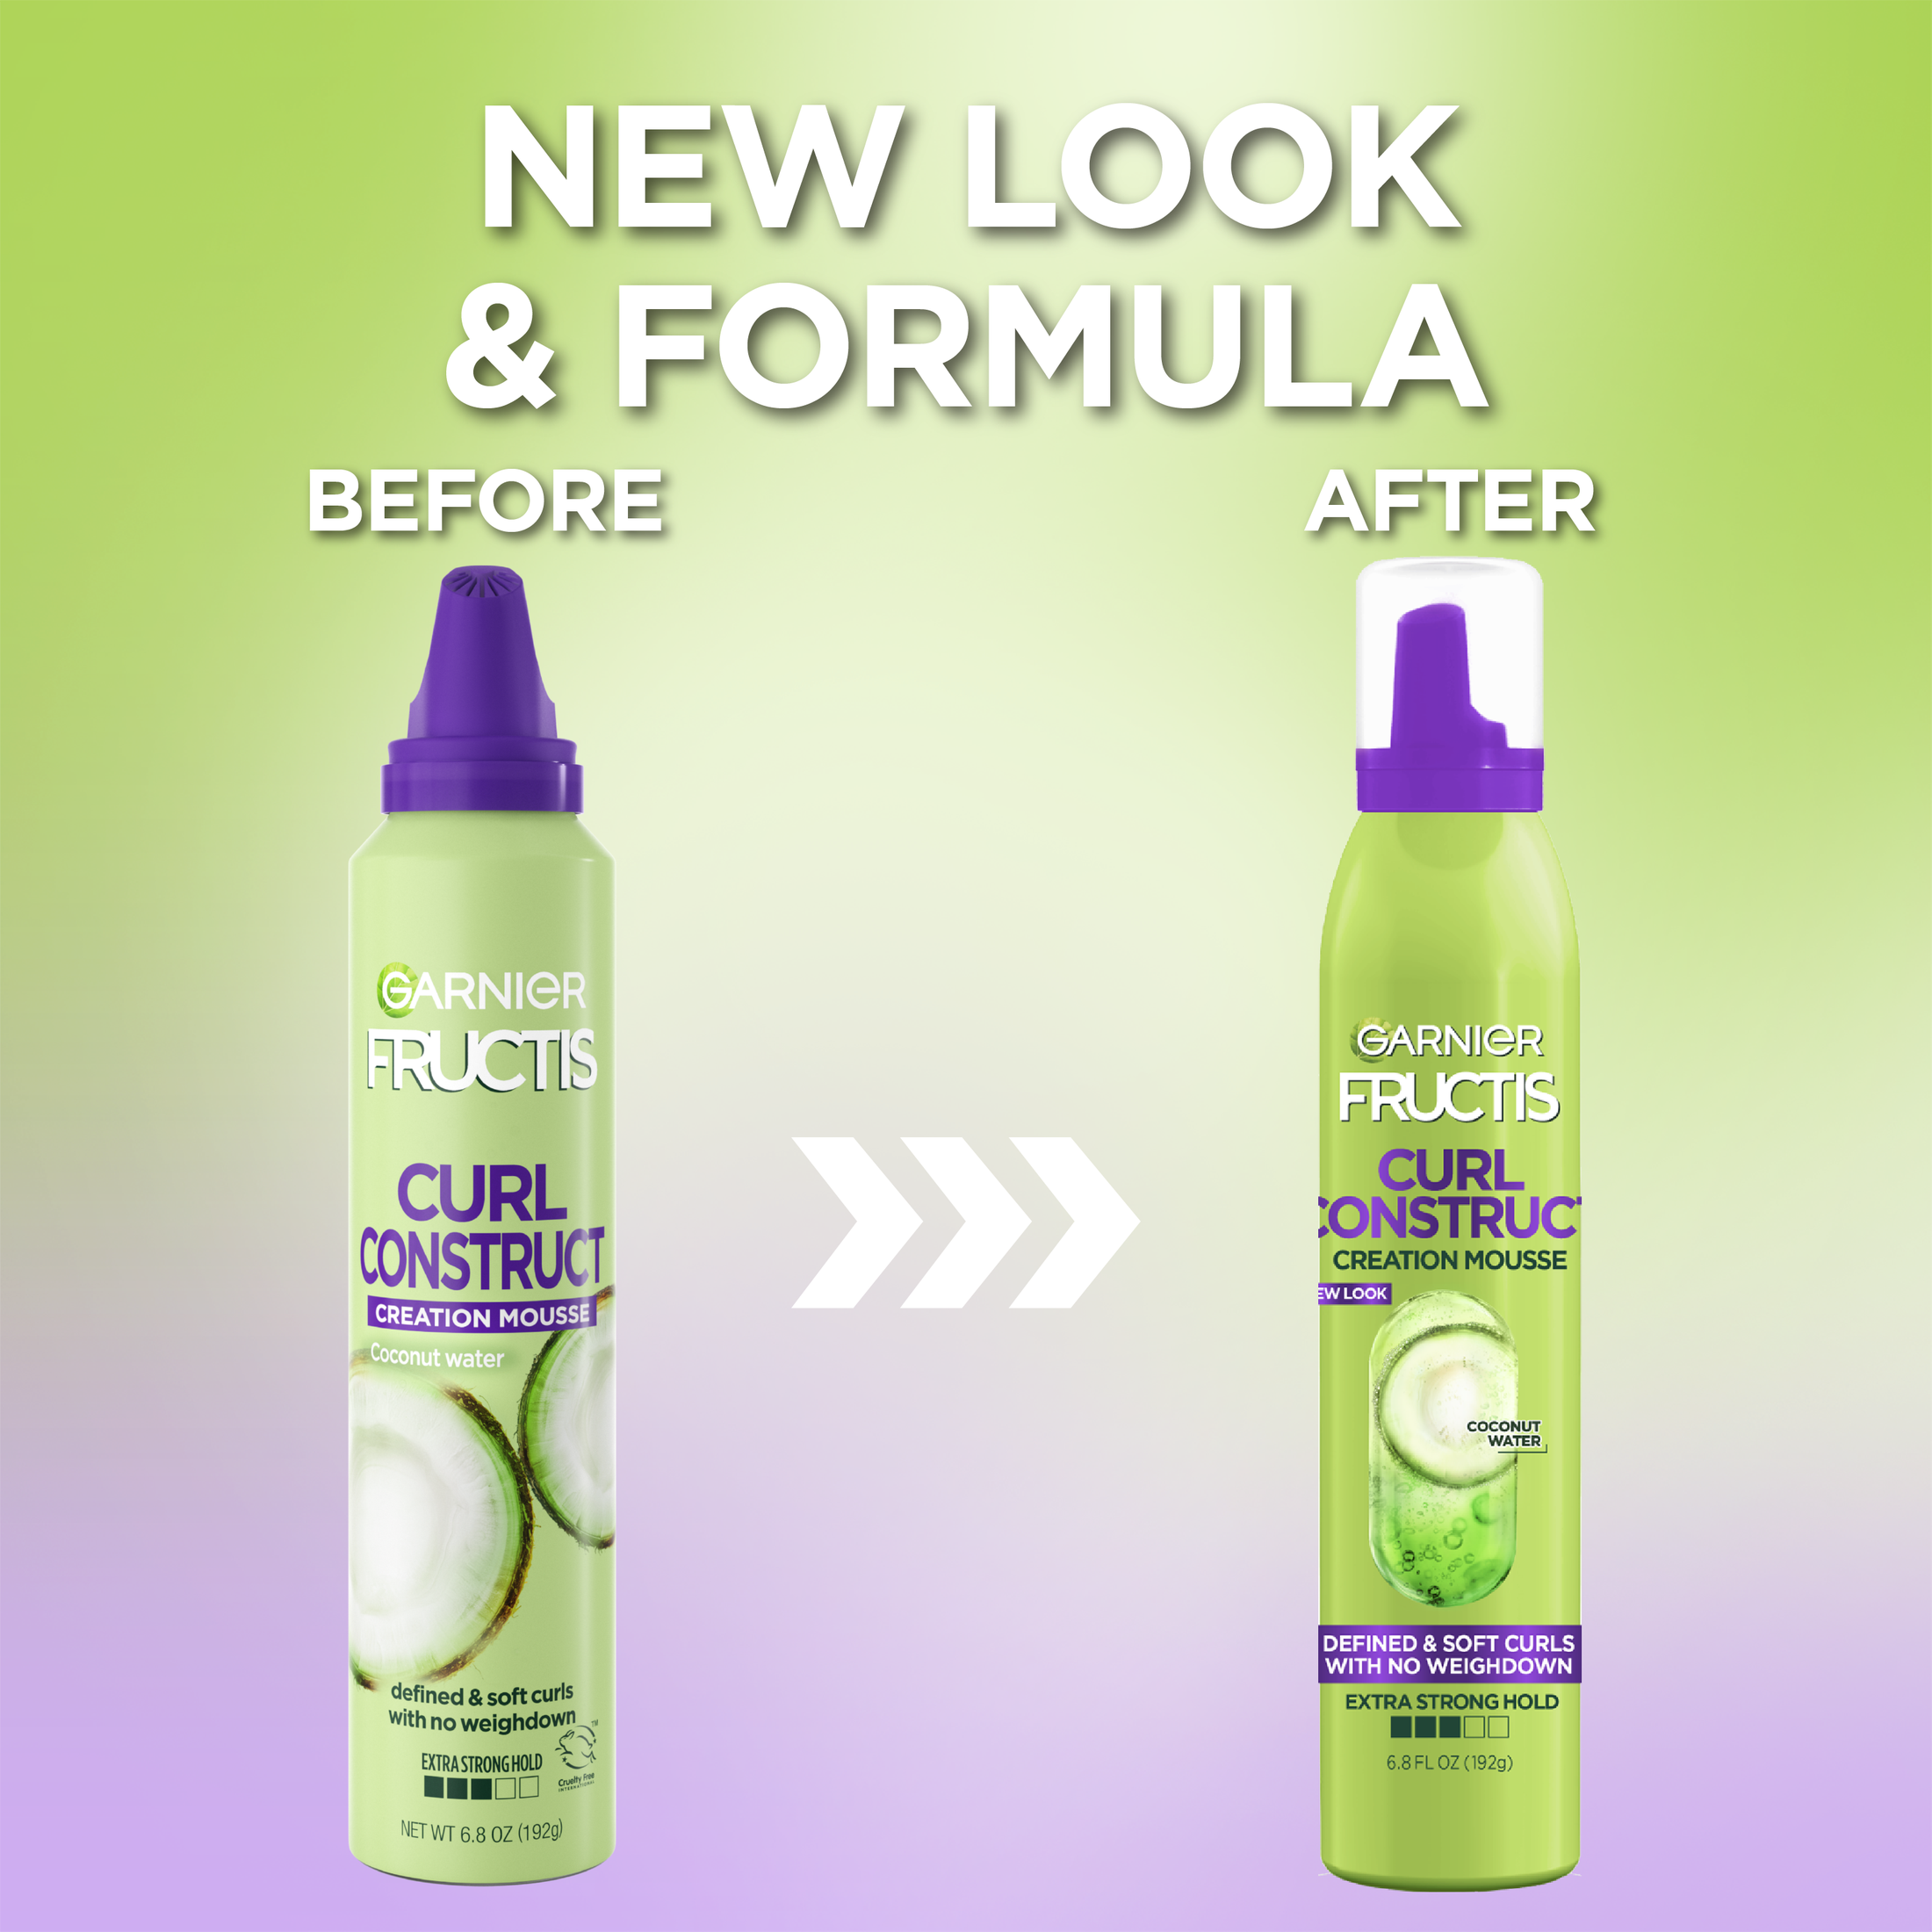 Garnier Fructis Style Curl Construct Creation Mousse, For Curly Hair, 6.8 oz - image 4 of 12